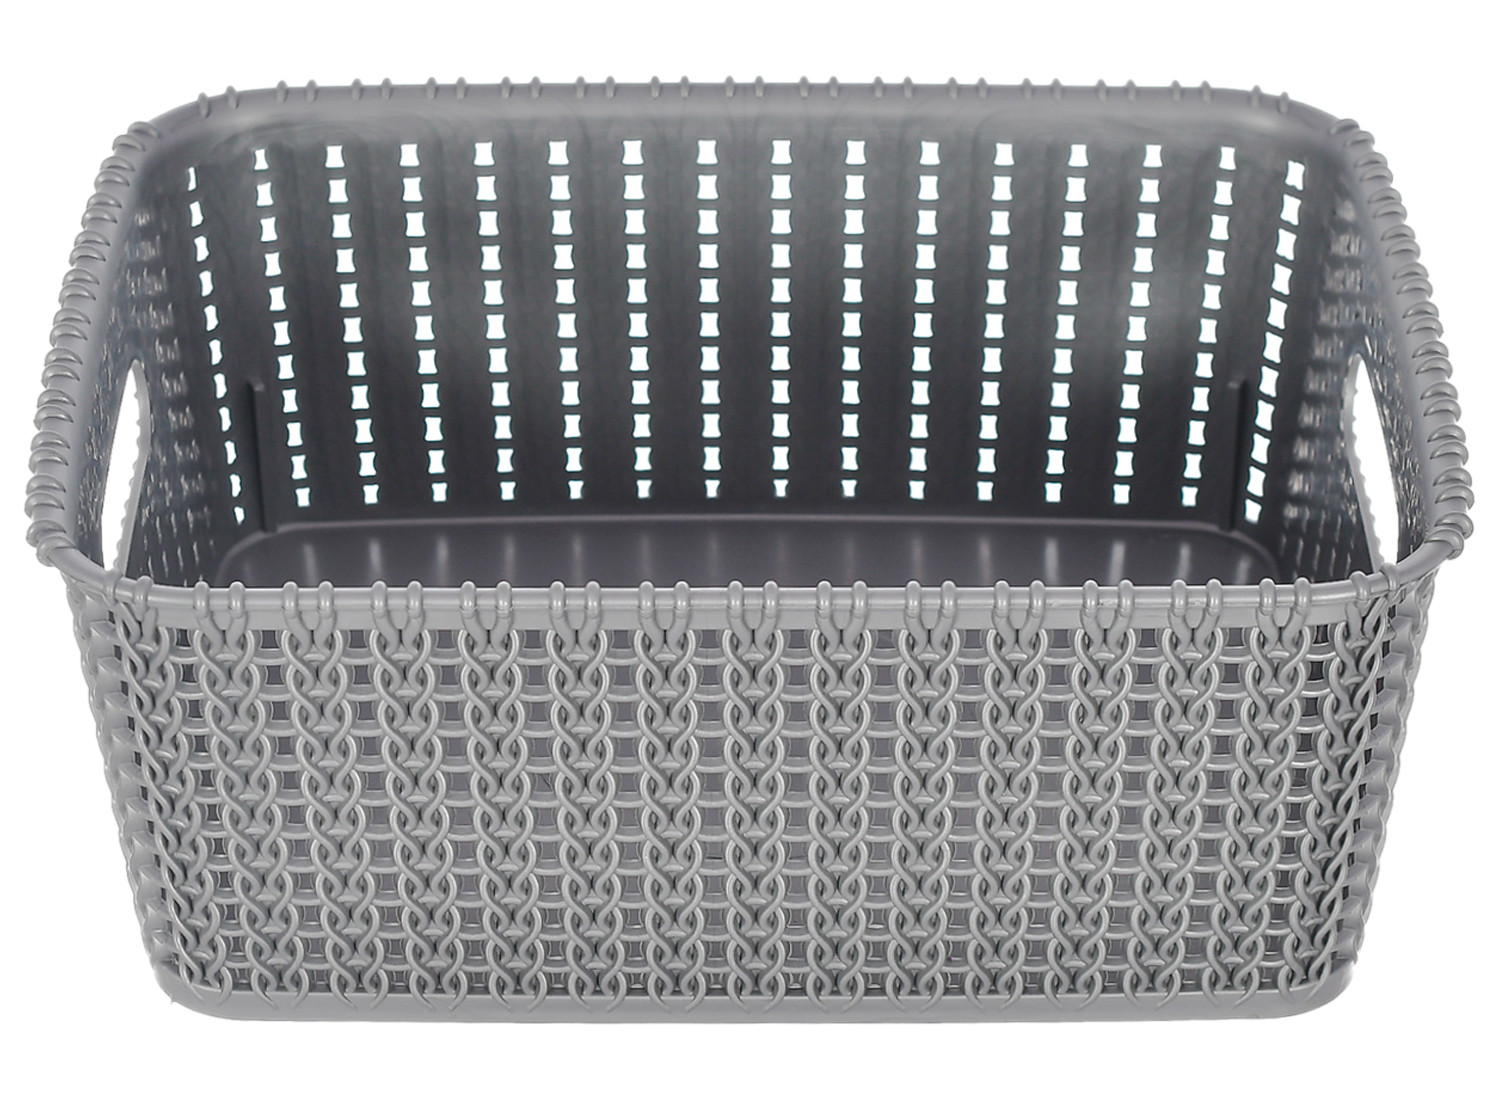 Kuber Industries Multiuses Large M 20 Plastic Tray/Basket/Organizer Without Lid- Pack of 3 (Brown & Grey & Brown) -46KM0105